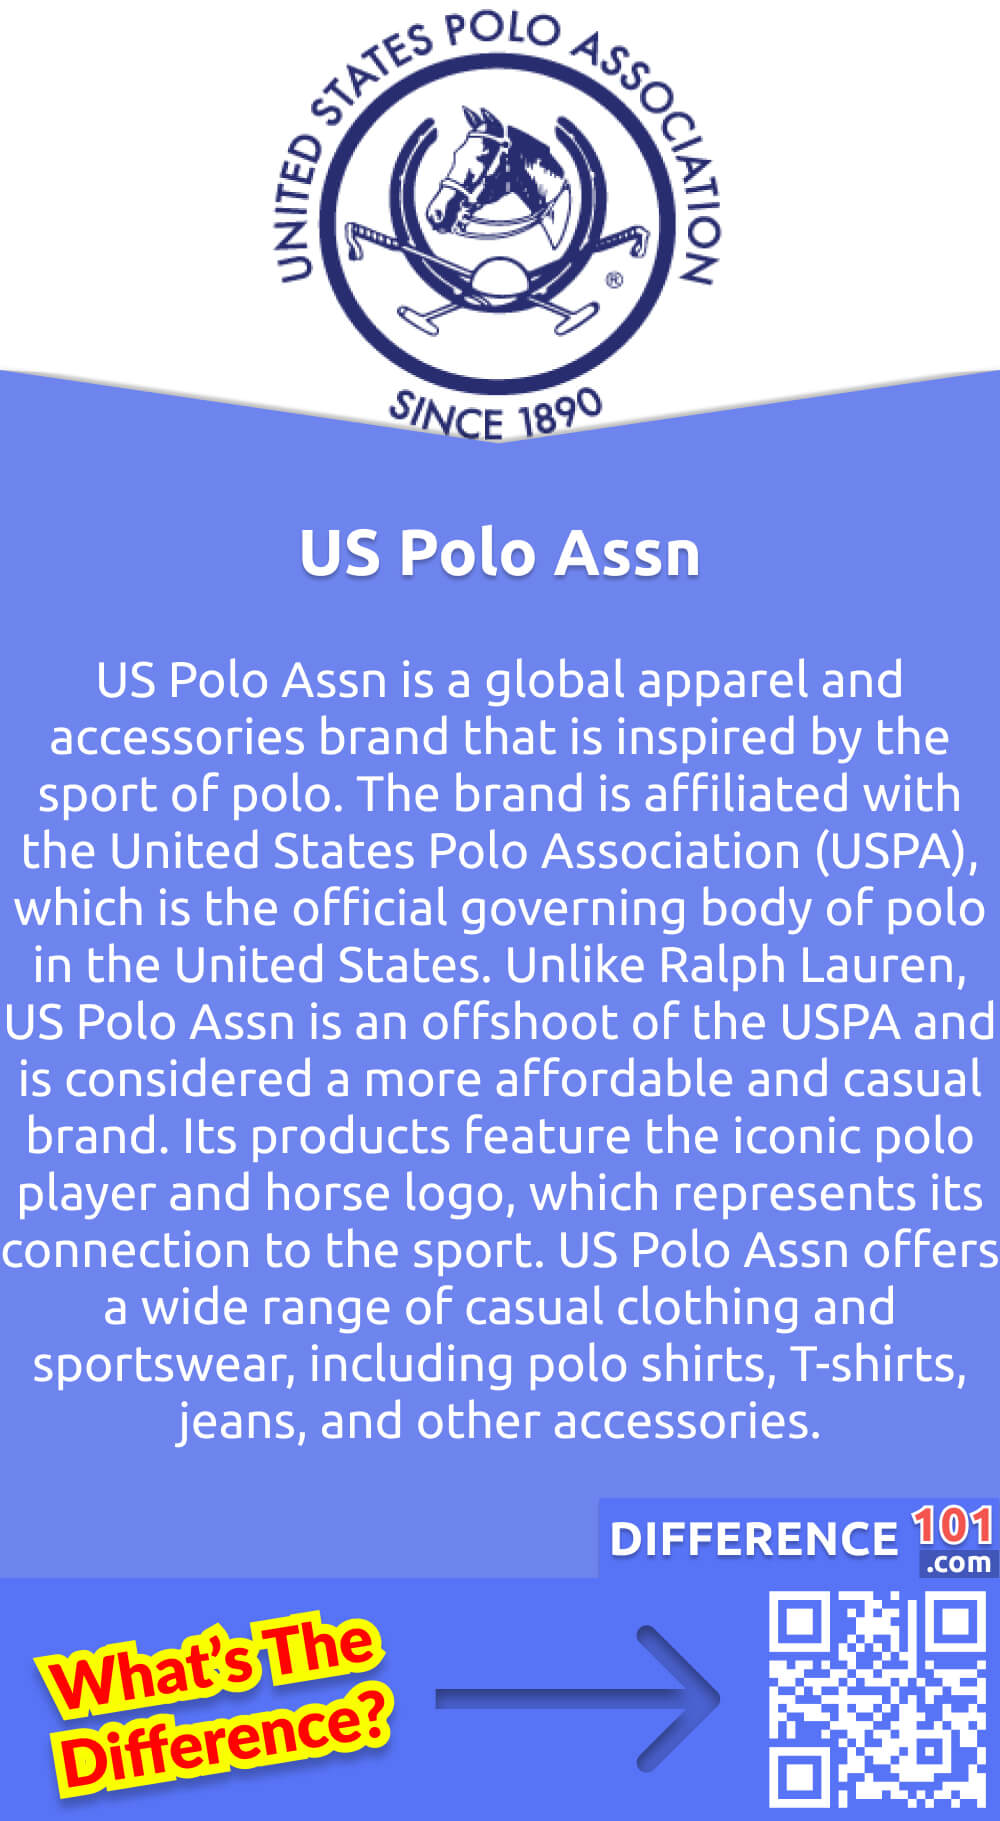 What Is US Polo Assn? US Polo Assn is a global apparel and accessories brand that is inspired by the sport of polo. The brand is affiliated with the United States Polo Association (USPA), which is the official governing body of polo in the United States. Unlike Ralph Lauren, US Polo Assn is an offshoot of the USPA and is considered a more affordable and casual brand. Its products feature the iconic polo player and horse logo, which represents its connection to the sport. US Polo Assn offers a wide range of casual clothing and sportswear, including polo shirts, T-shirts, jeans, and other accessories.